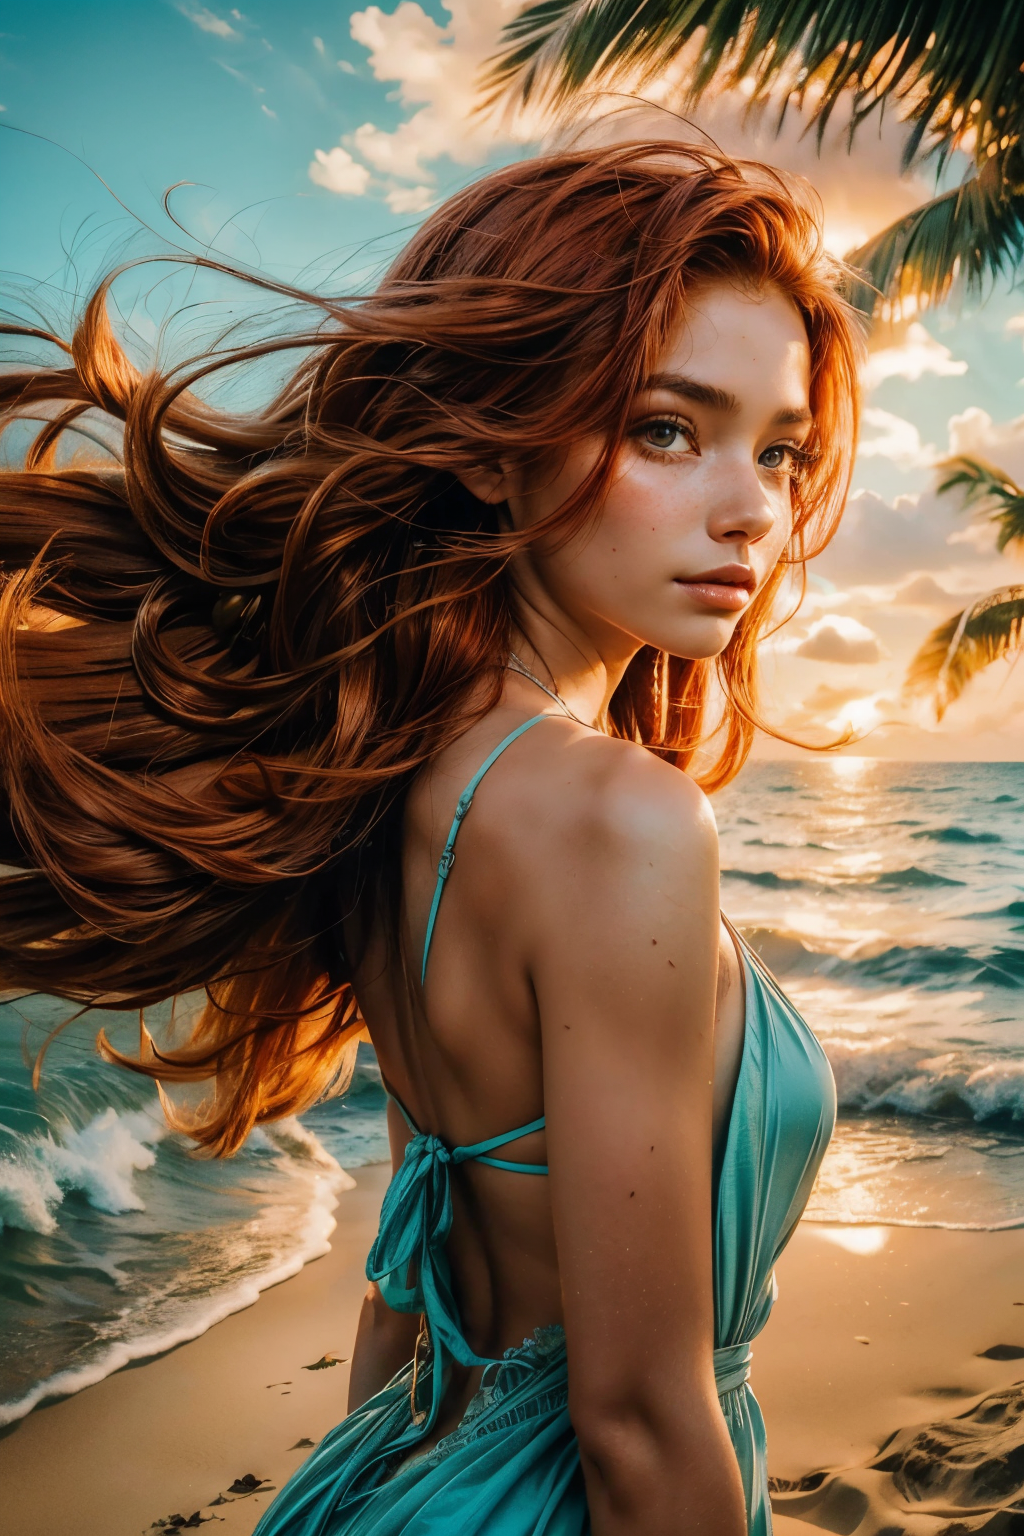 a girl with stunning red hair,standing alone on a deserted tropical island,surrounded by clear turquoise water and pristine sandy beaches,beautiful detailed eyes,long eyelashes,charming smile,flowing locks of red hair,soft and smooth skin,sun-kissed cheeks and freckles,a sense of curiosity and adventure in her eyes,seagulls flying above her, palm trees swaying gently in the breeze, exotic flowers blooming, colorful tropical birds chirping,colorful sunset casting a warm glow on the horizon,her dress flowing in the wind, barefoot in the warm sand,waves crashing gently on the shore, the sound of ocean waves calming her soul,the distant sound of a ship's horn,a sense of solitude and serenity, a longing for companionship and discovery,highres,ultra-detailed,photorealistic rendering with vivid colors and sharp focus,capturing the beauty of the girl and the enchanting nature of the island,stunning portrait with a touch of fantasy and mystery,a masterpiece of art that captures the viewer's imagination.